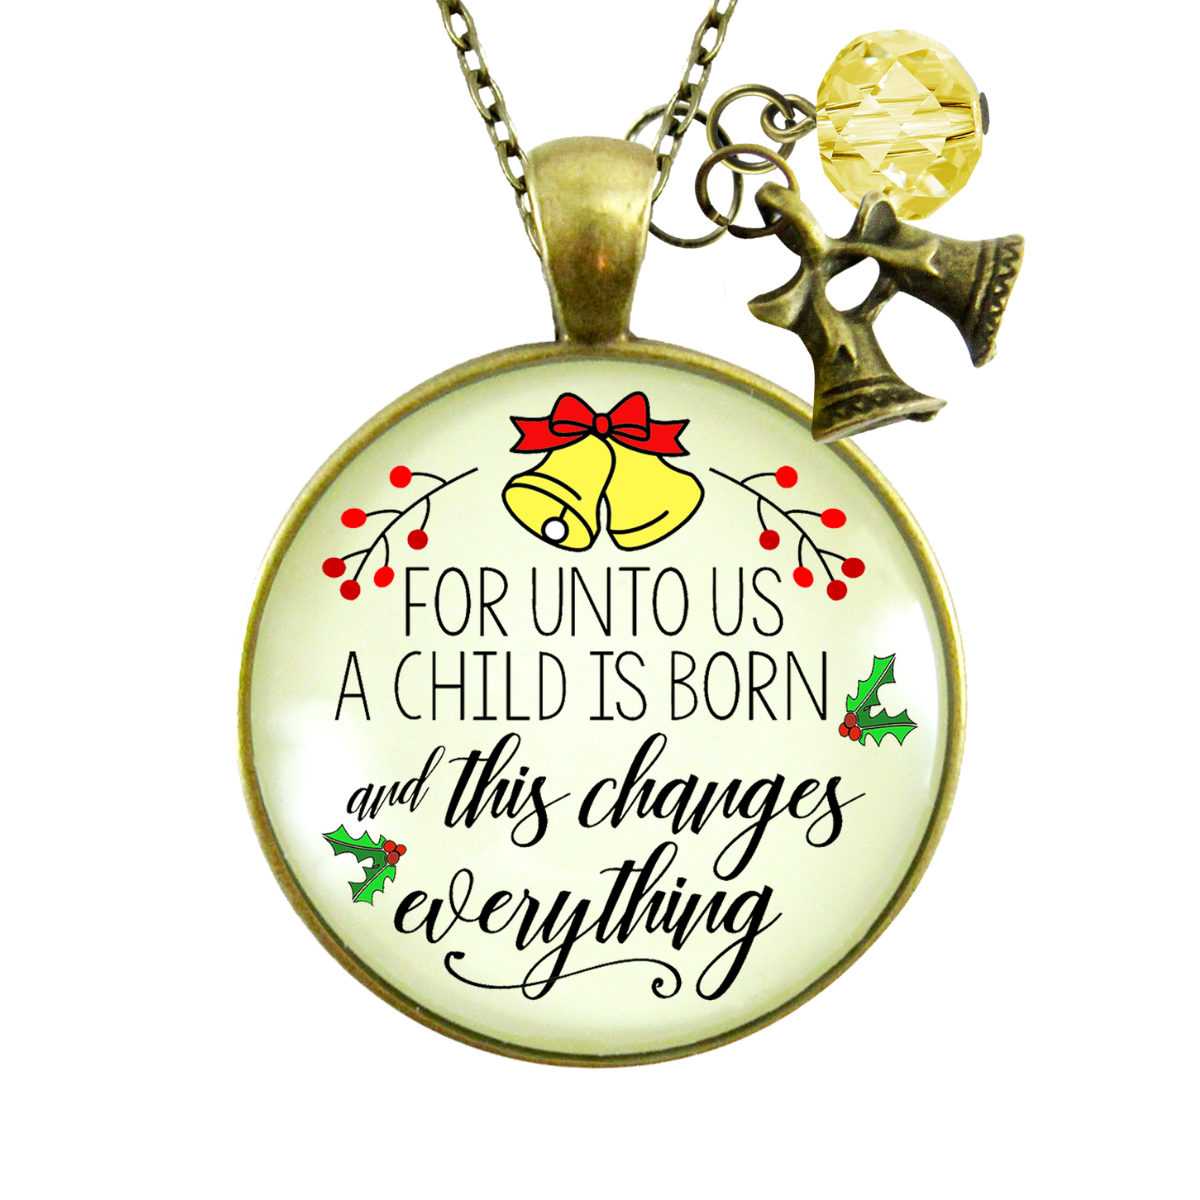 Christmas Jewelry For Women For Unto Us a Child Is Born Charm Necklace Faith Nativity Handmade Pendant  Necklace - Gutsy Goodness Handmade Jewelry